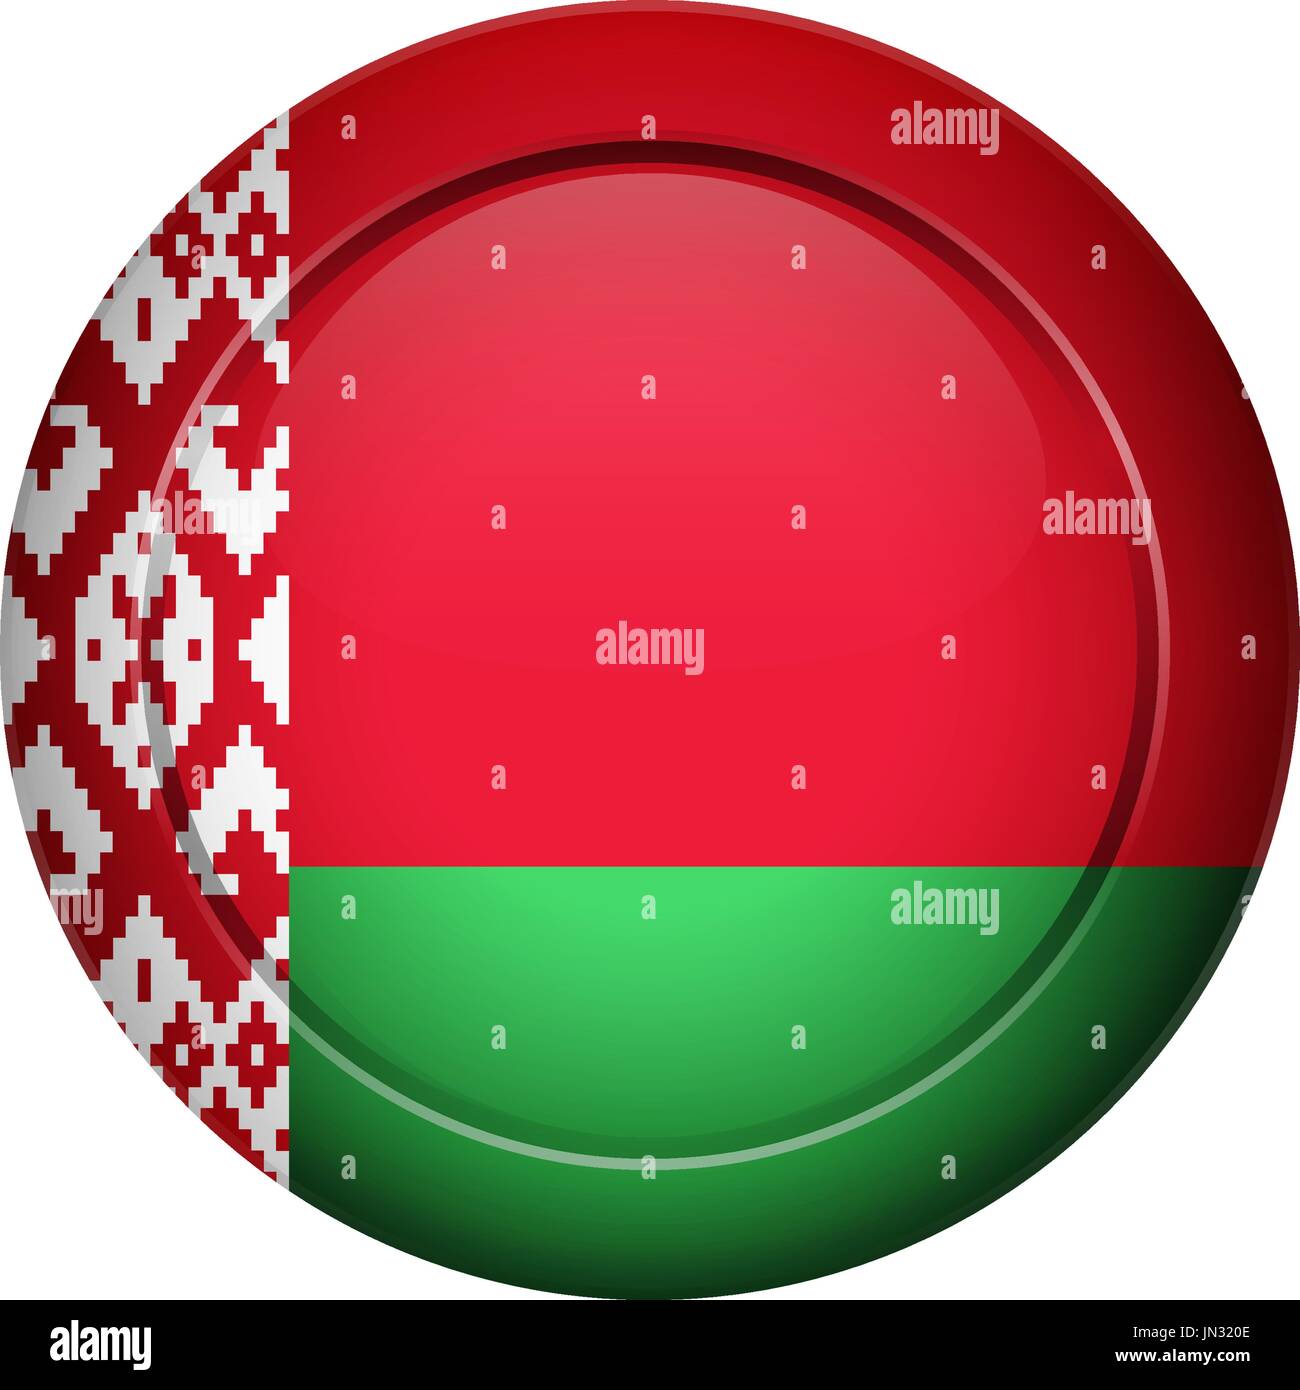 Flag design. Belarus flag on the round button. Isolated template for your designs. Vector illustration. Stock Vector